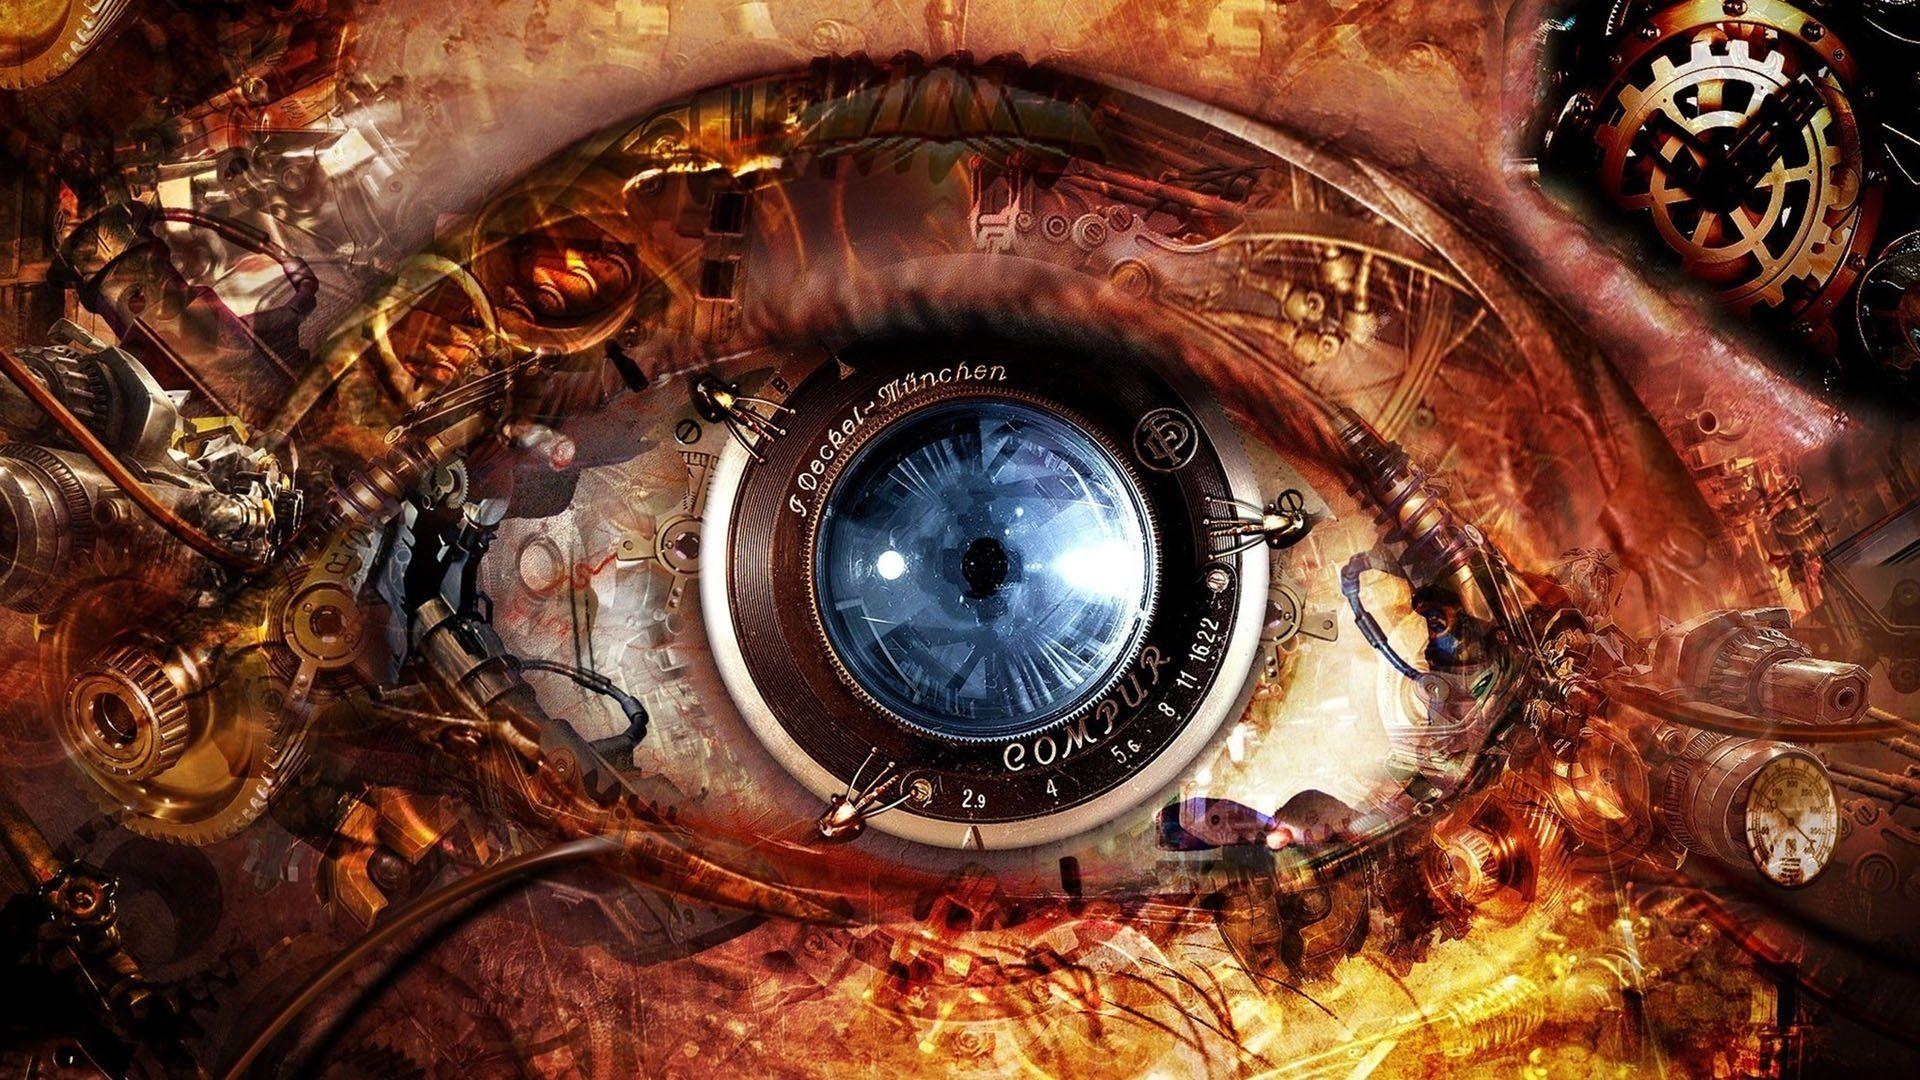 An eye with gears and machinery in the background - Steampunk